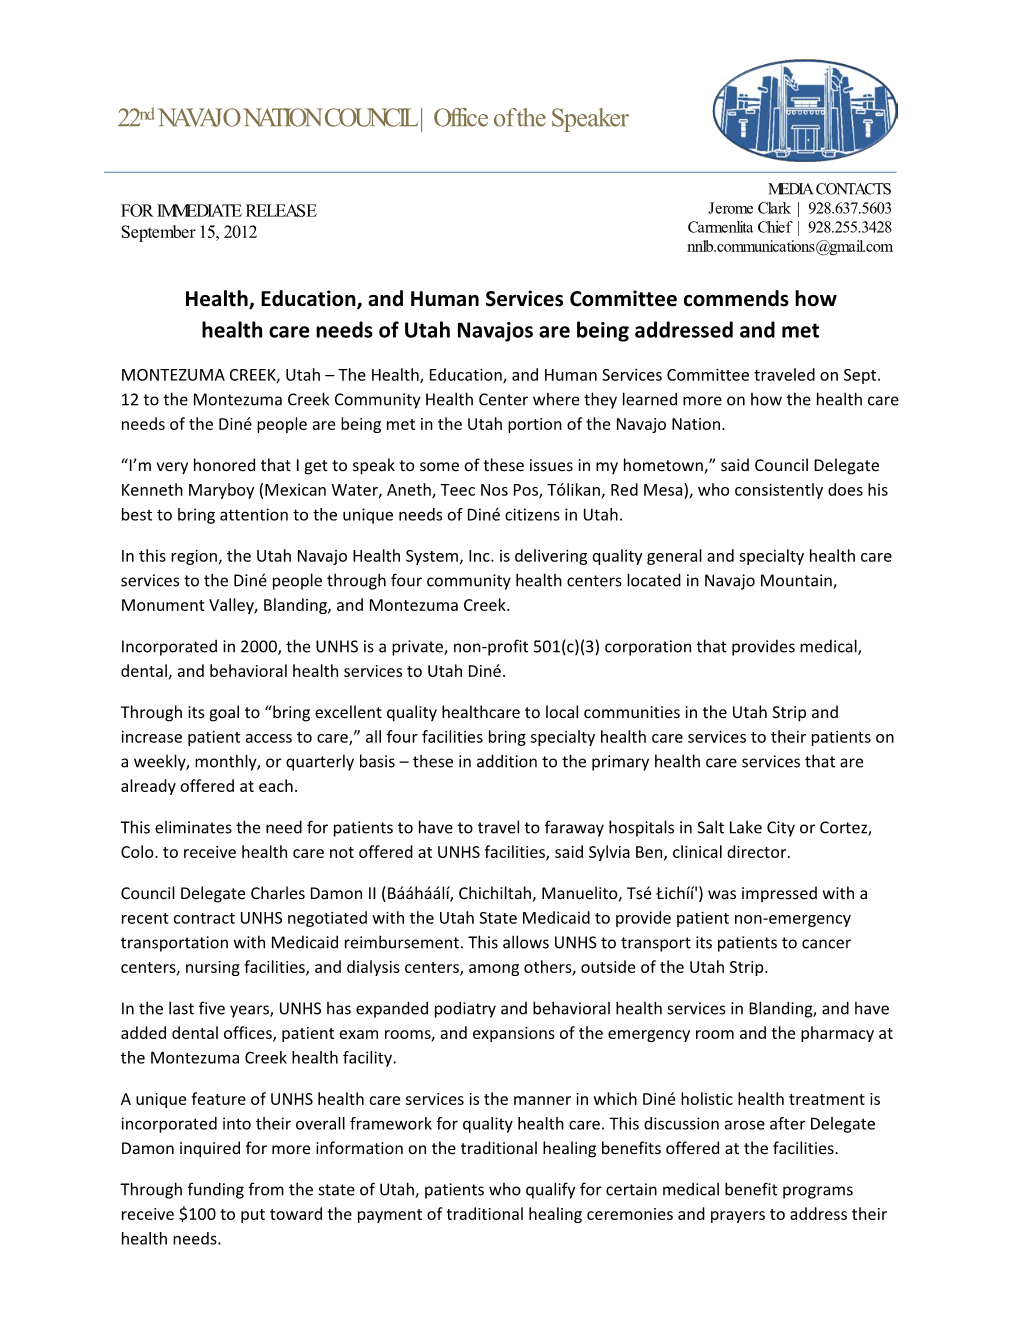 Health, Education, and Human Services Committee Commends How Health Care Needs of Utah Navajos Are Being Addressed and Met